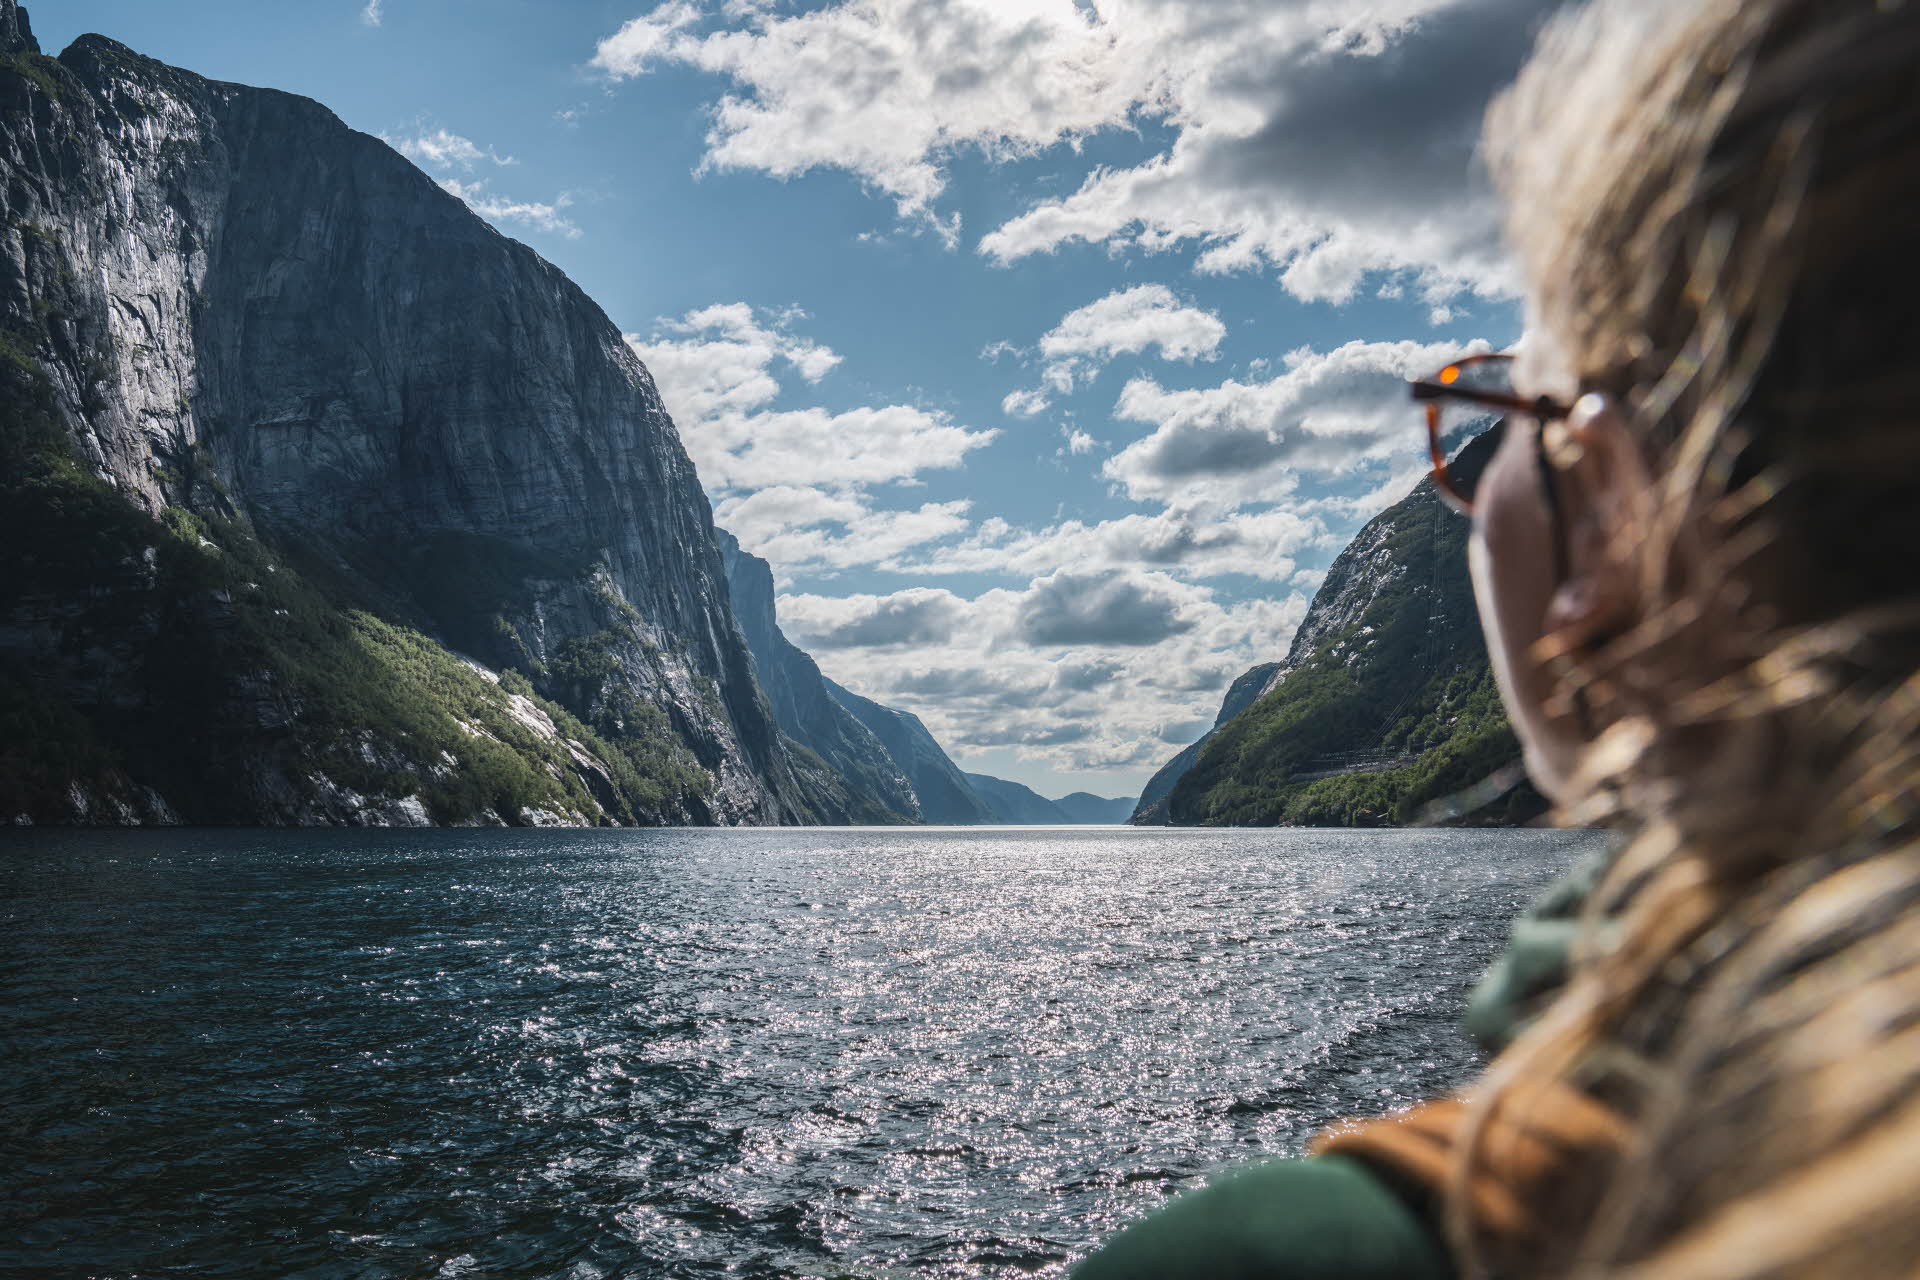 A blonde woman wearing sunglasses in the foreground, looking at the Lysefjord and mountains